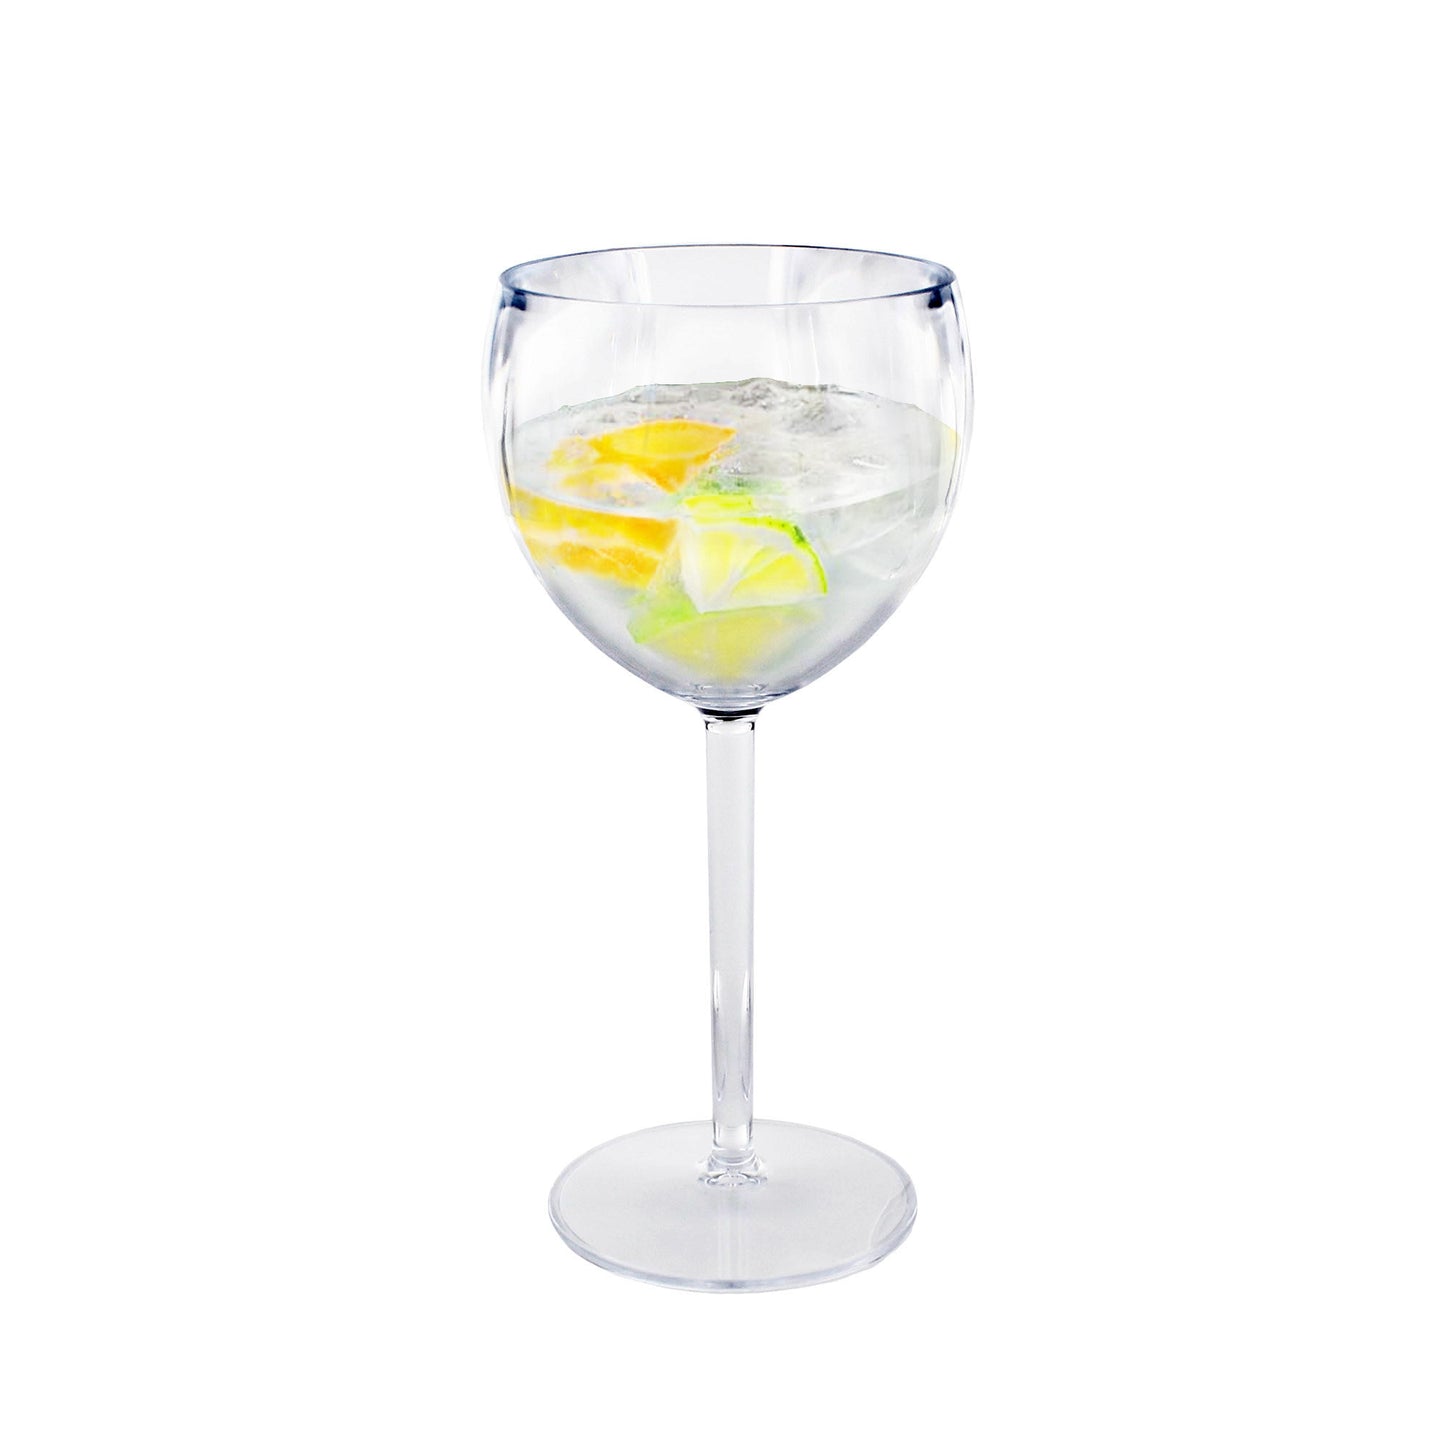 Reusable Plastic Gin Glasses – Dishwasher Safe, Classic Bowl Shape, Elegant, Perfect for Outdoor Events, Parties, Hot Tub, Beach, Weddings